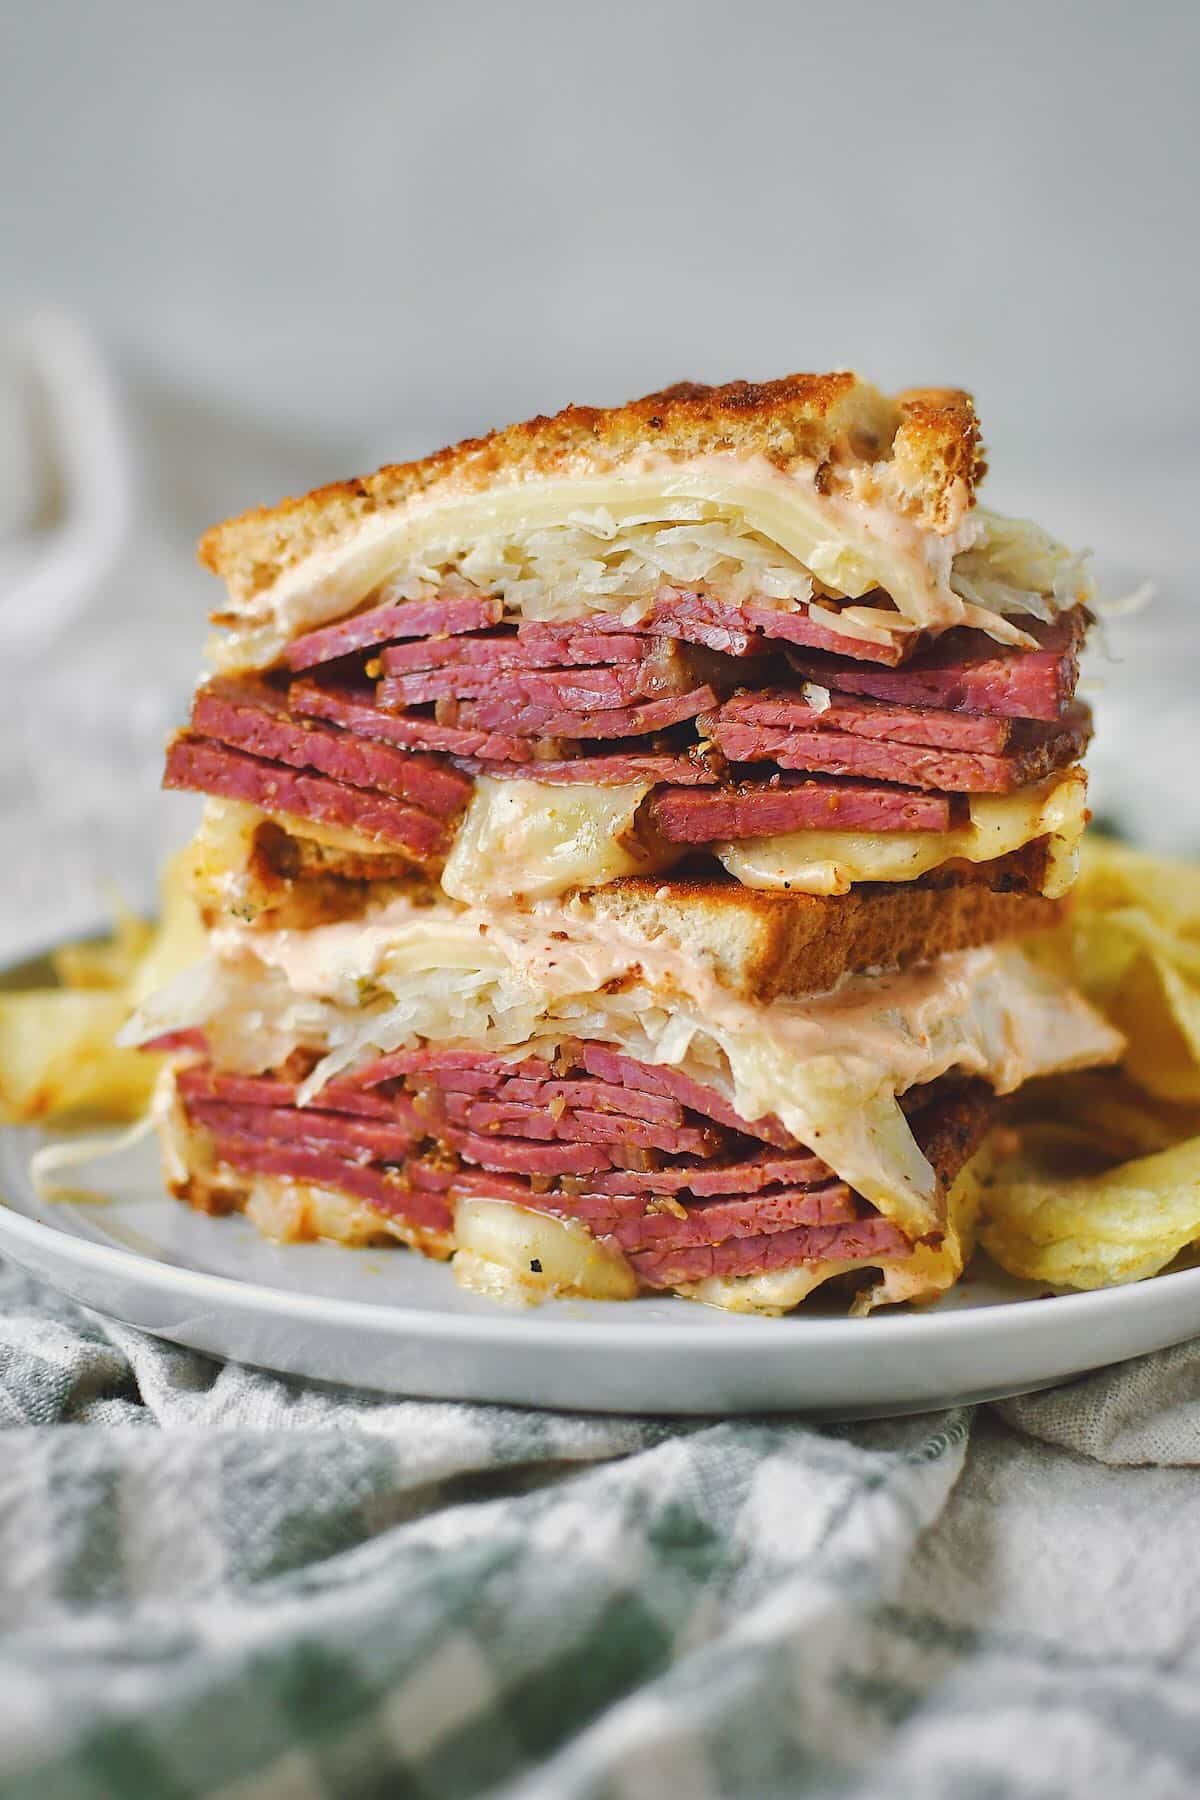 Finished Reuben Sandwich cut in half, on a plate, served with chips.